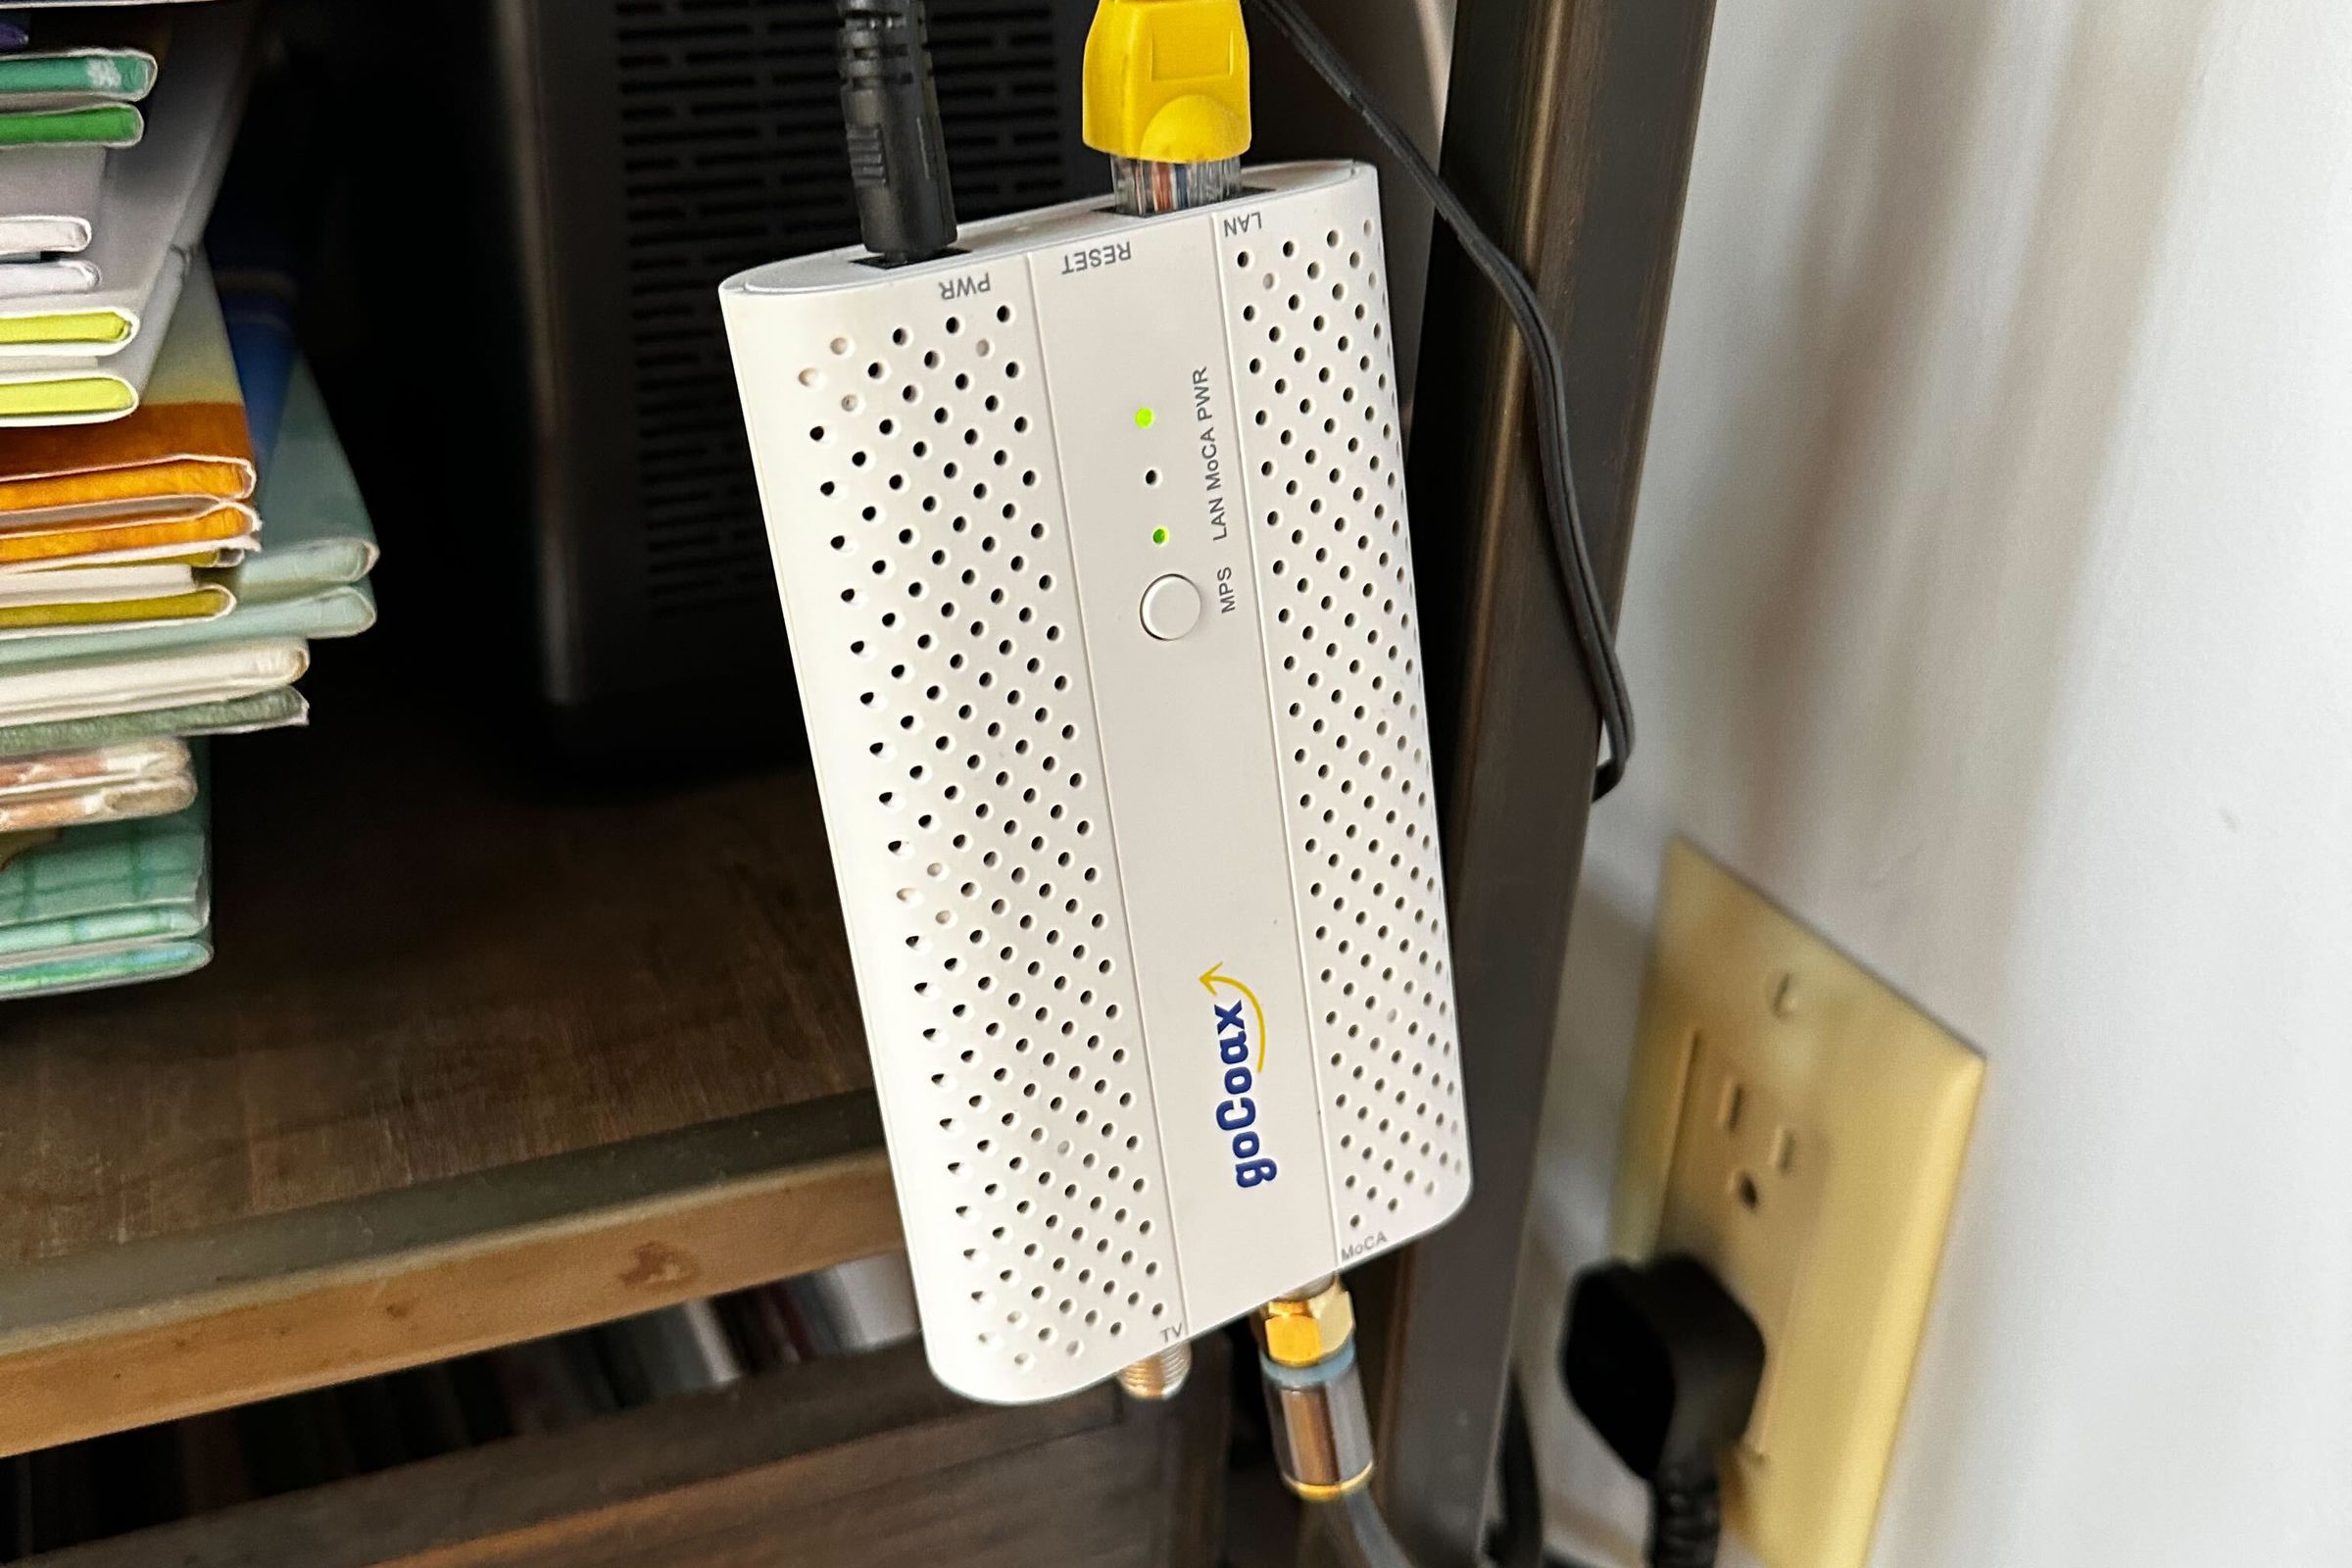 shot of a white MoCA adapter labelled “goCoax” with ethernet and power cables emerging from the top and a coax cable coming from the bottom. The adapter is dangling in midair in front of a bookshelf, with a power outlet visible in the background. 